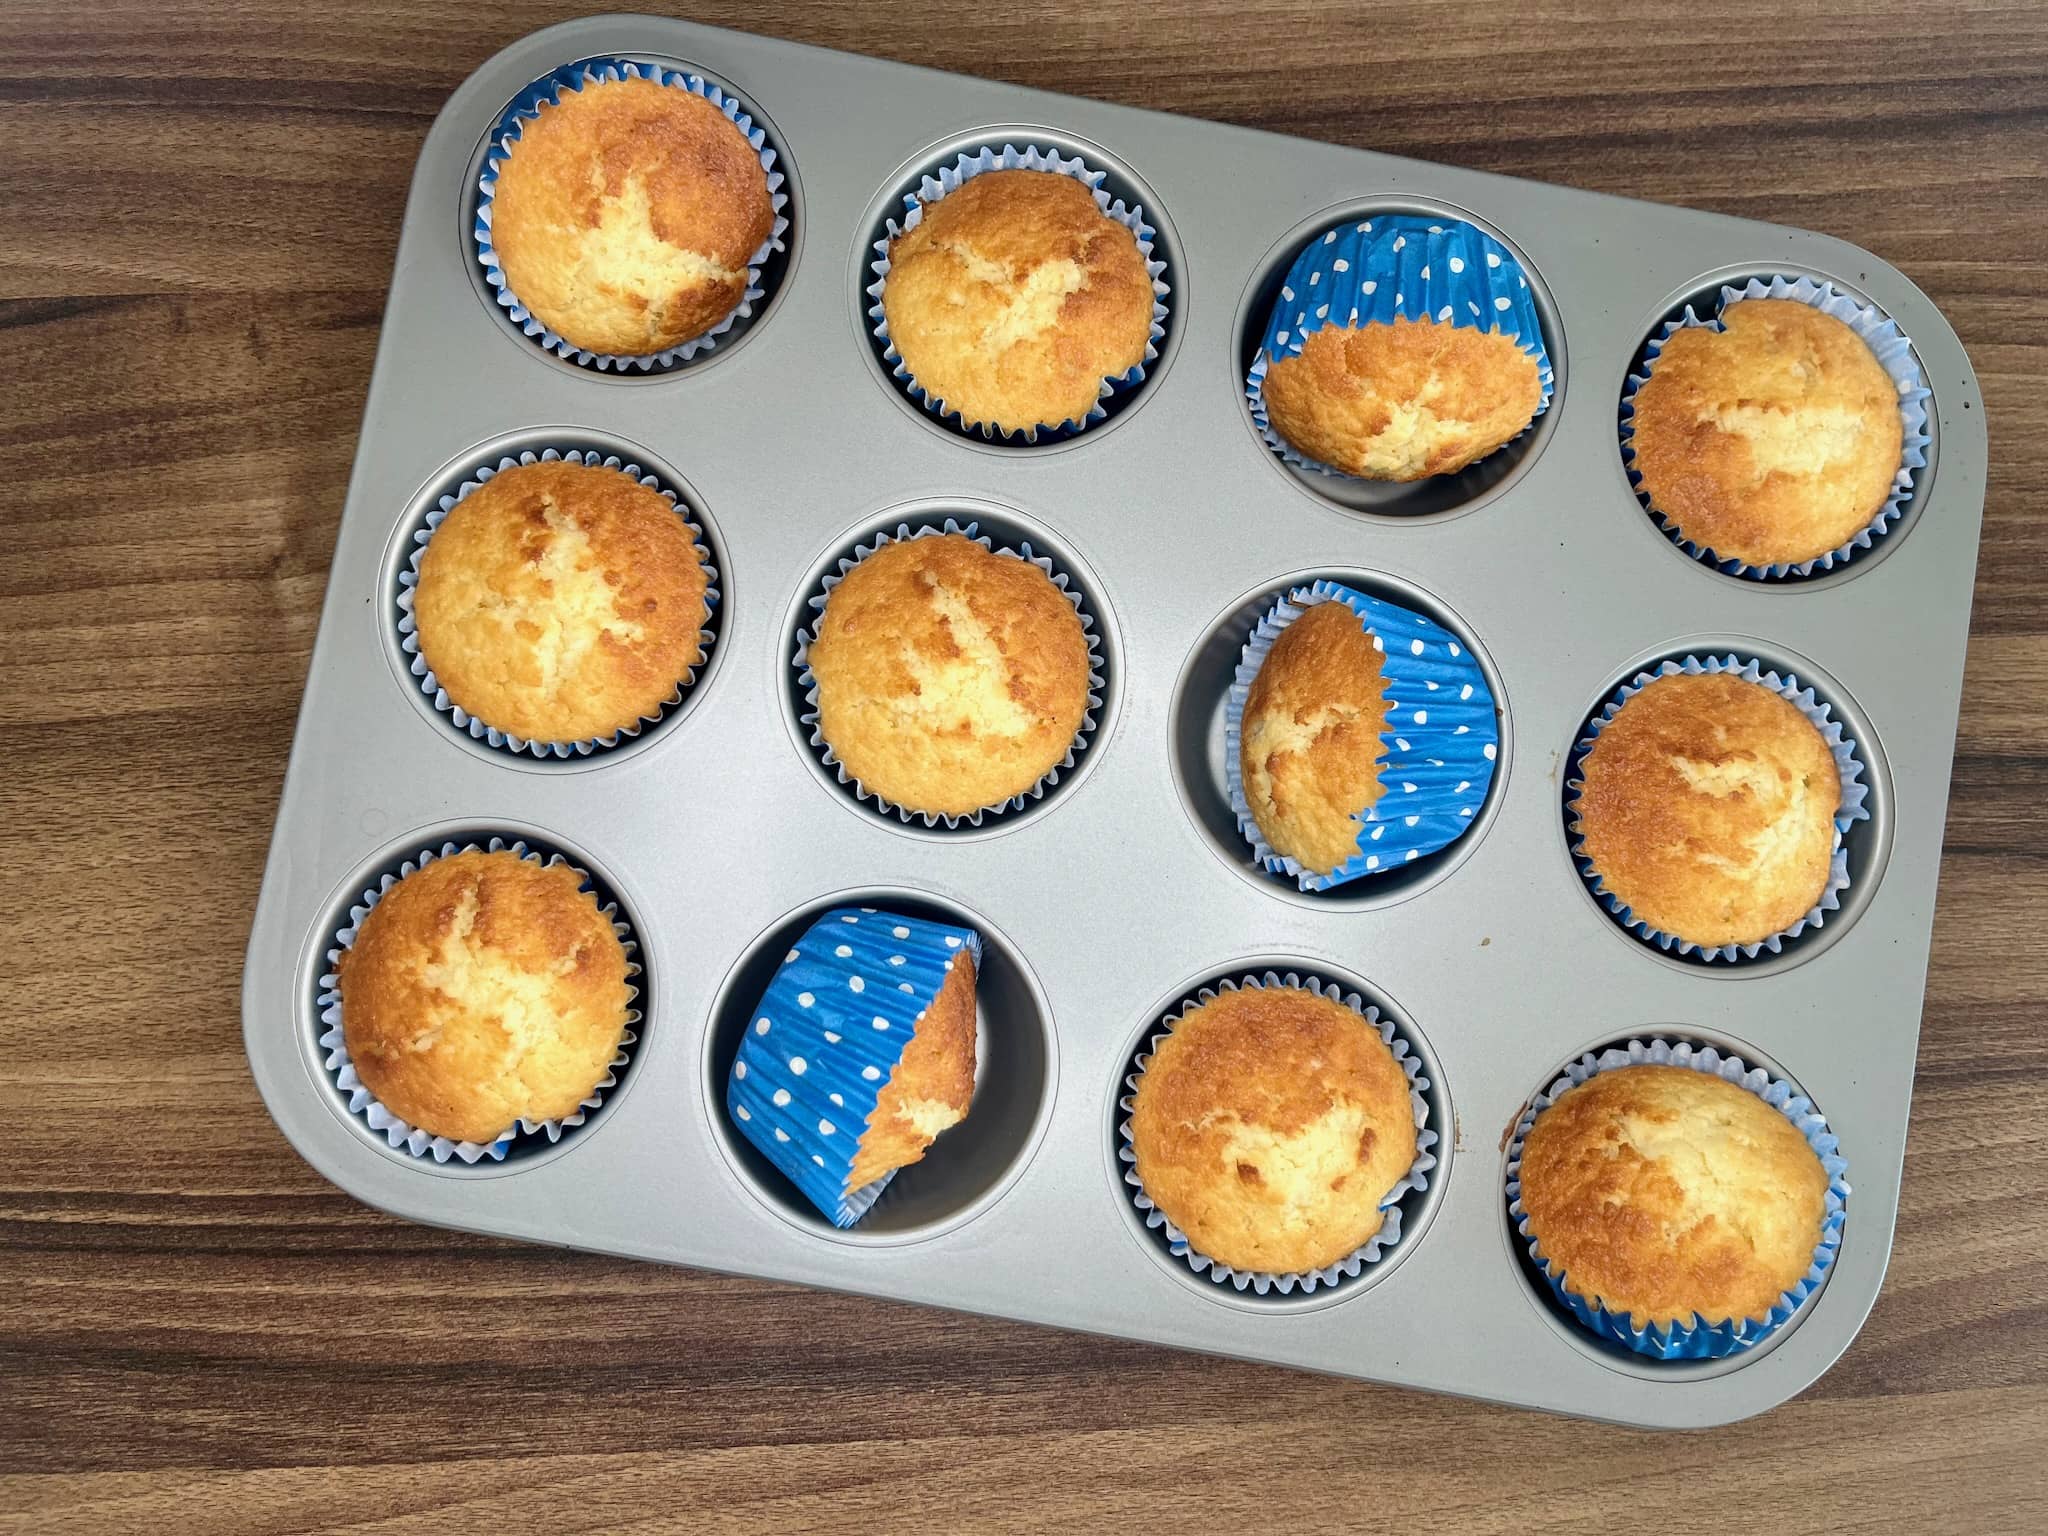 The coconut muffins are still in the tin after baking.